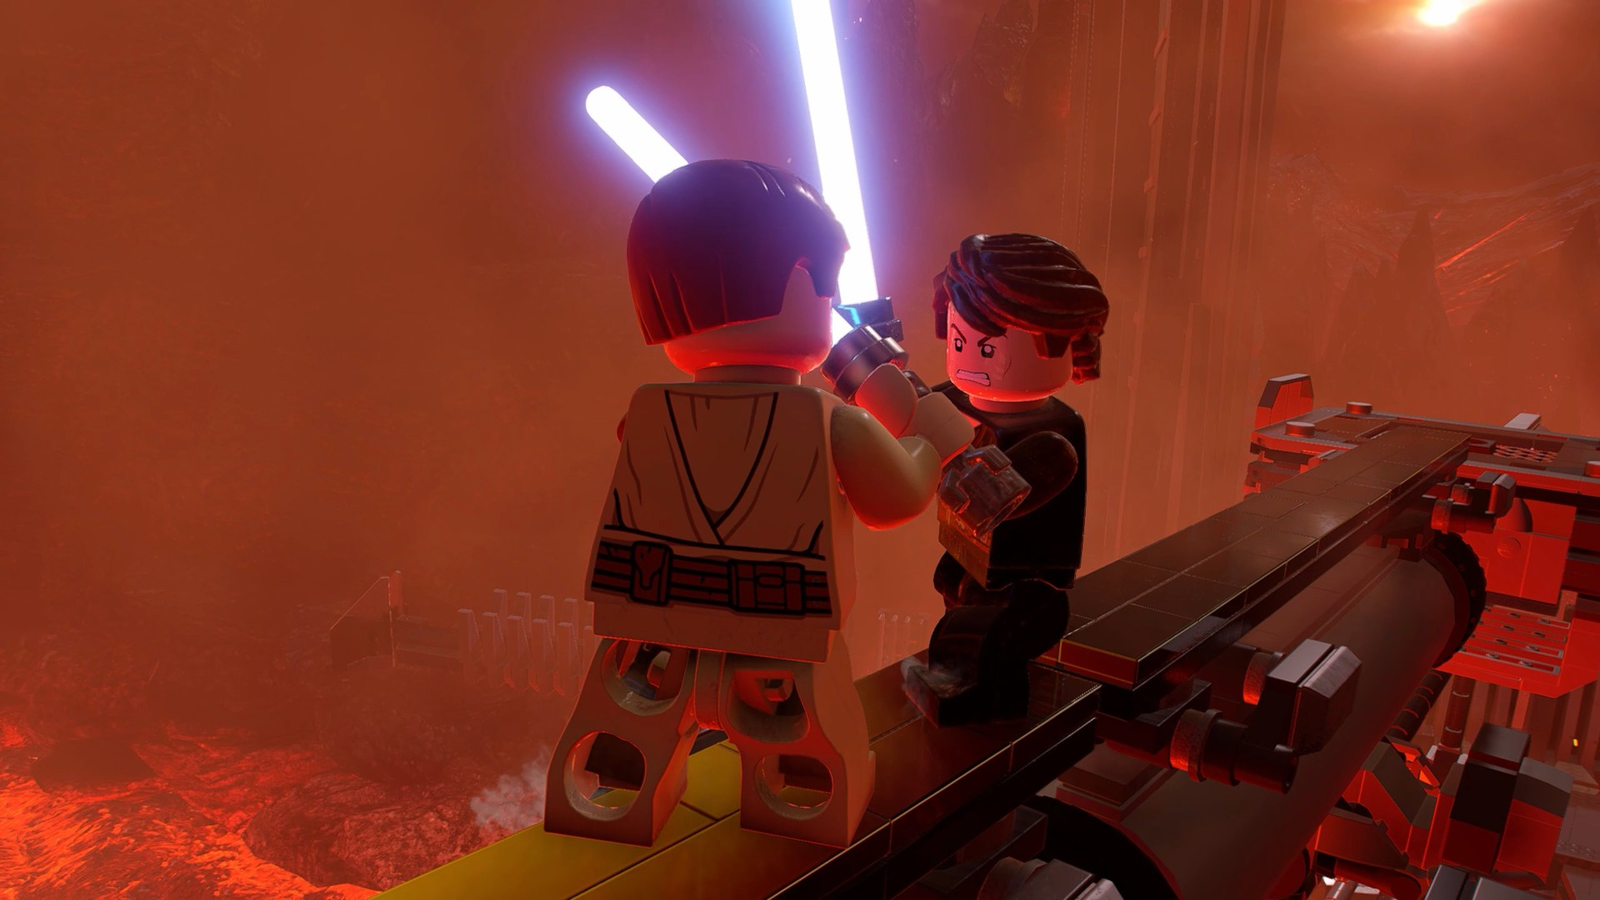 Lego Star Wars: The Complete Saga cheats for characters and more